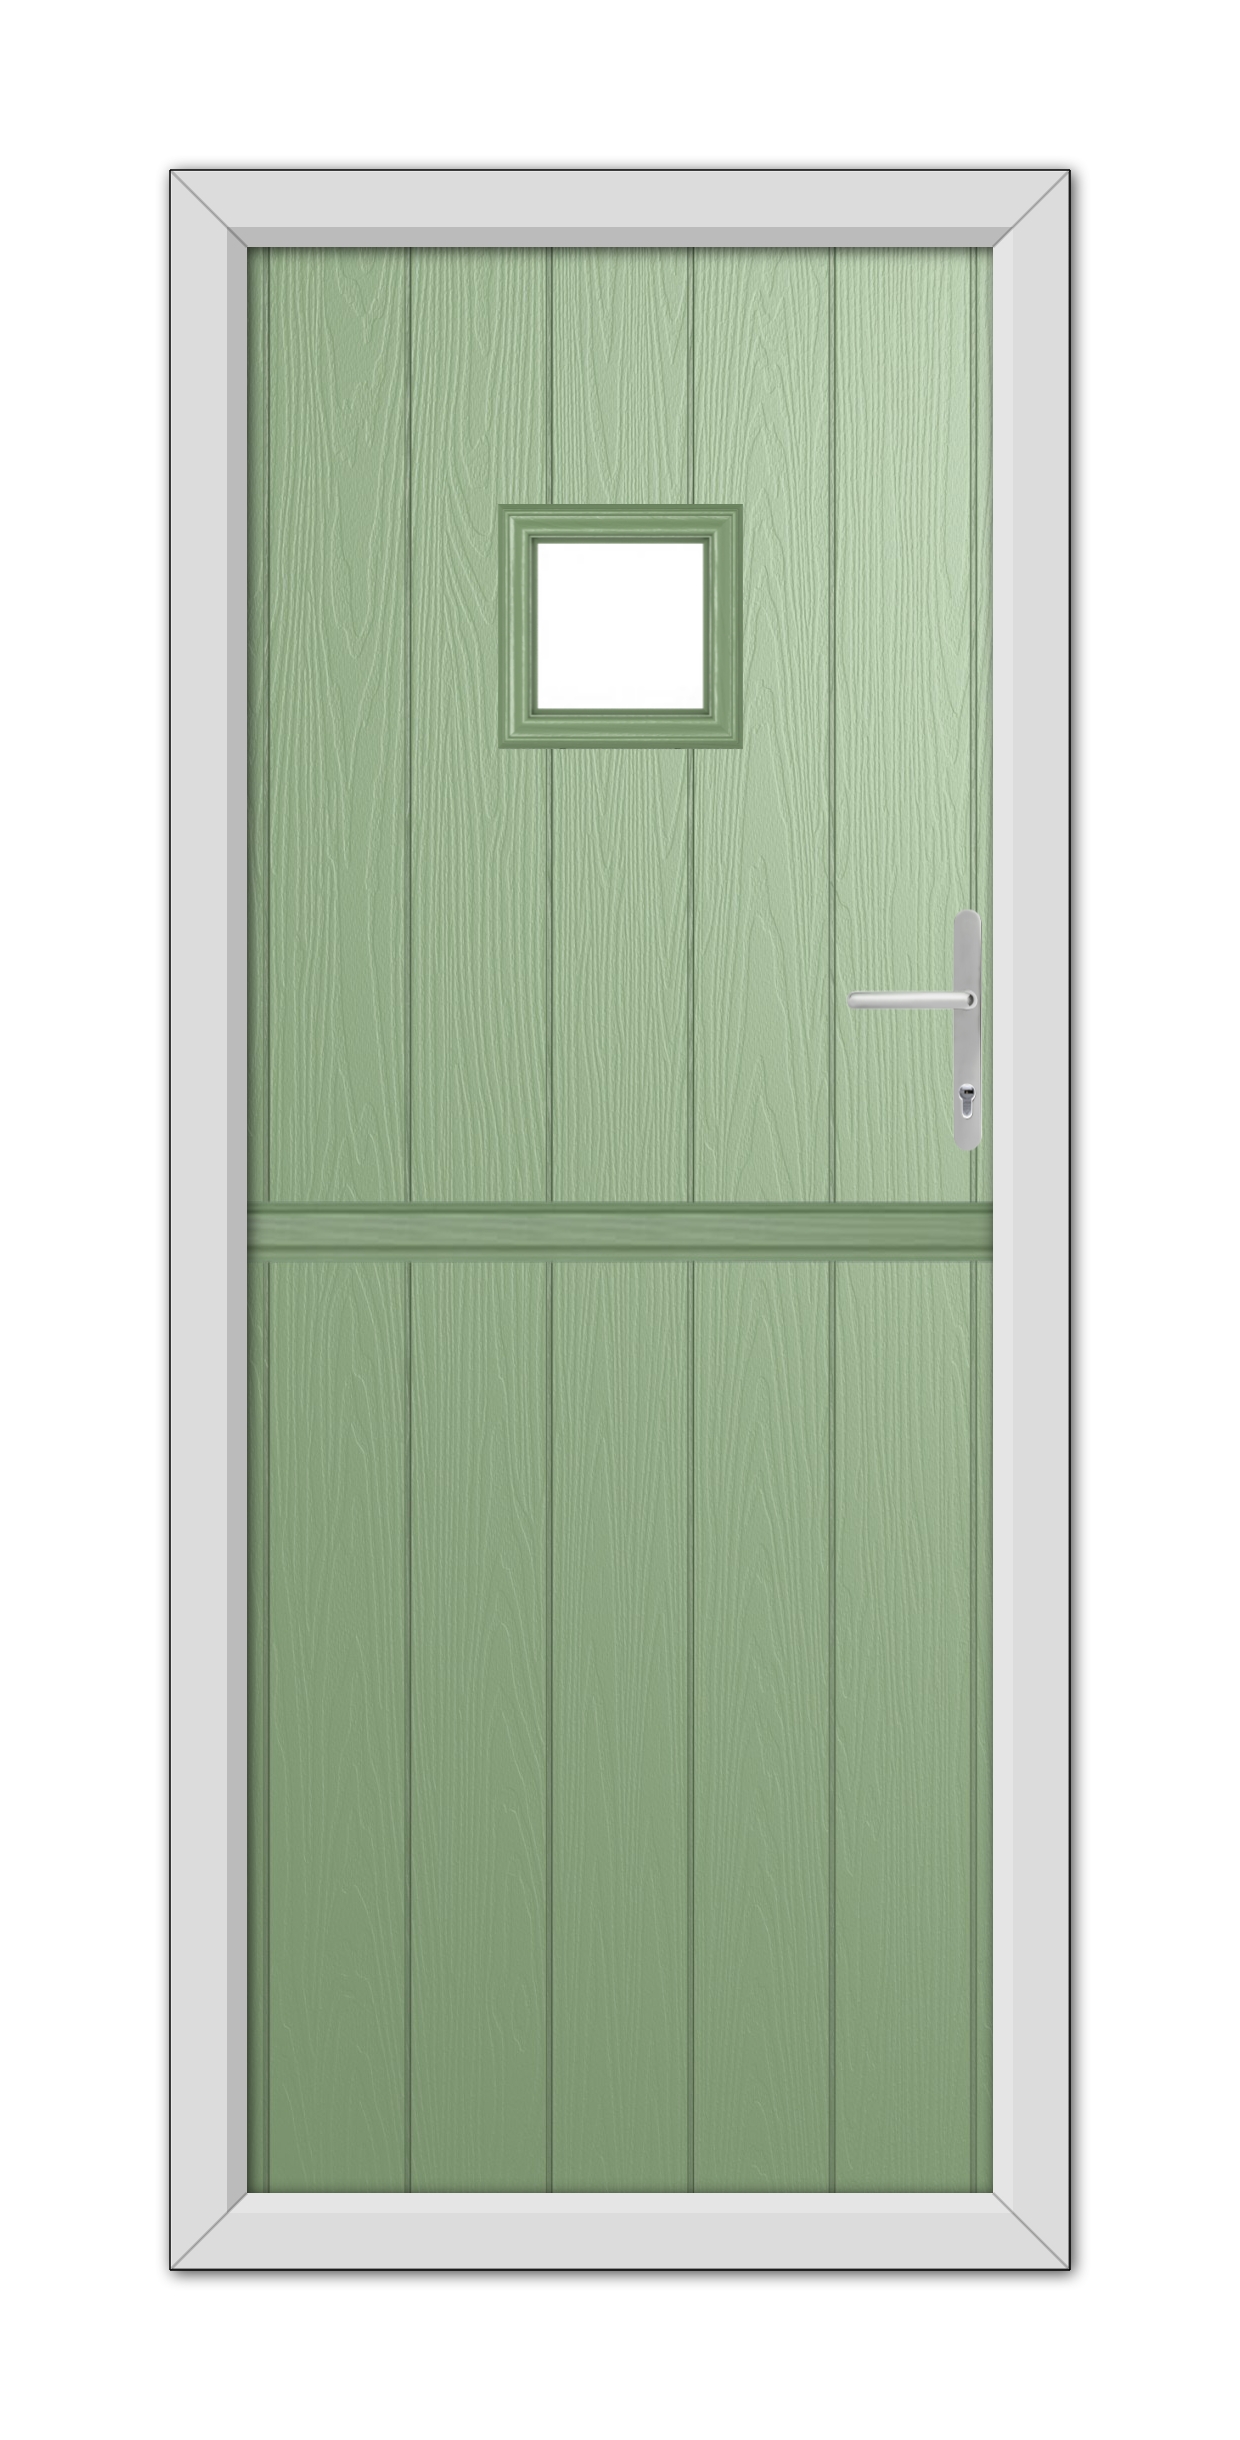 A Chartwell Green Brampton Stable Composite Door 48mm Timber Core with a small square window at the top, featuring a modern handle on the right side, set within a white frame.